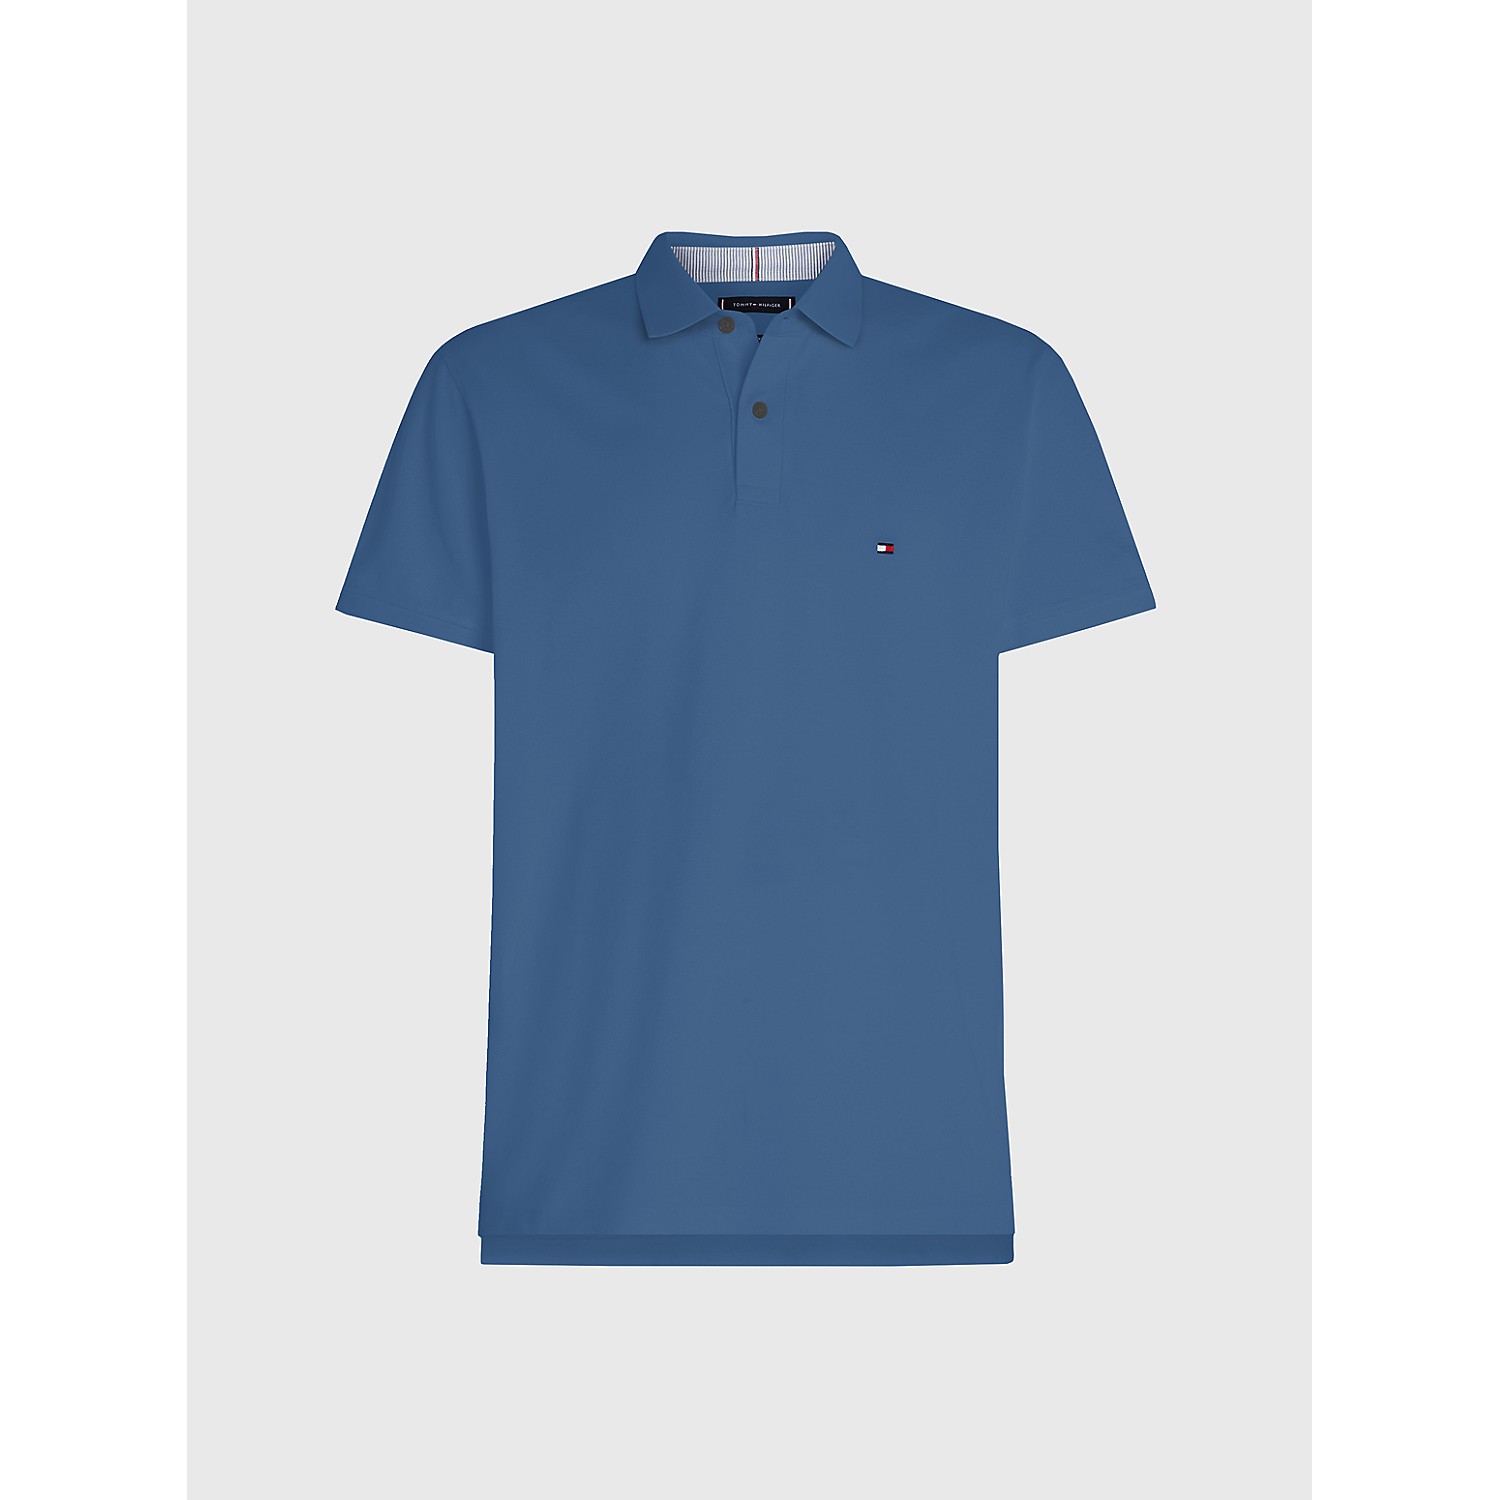 TOMMY HILFIGER Classic Fit 1985 Polo